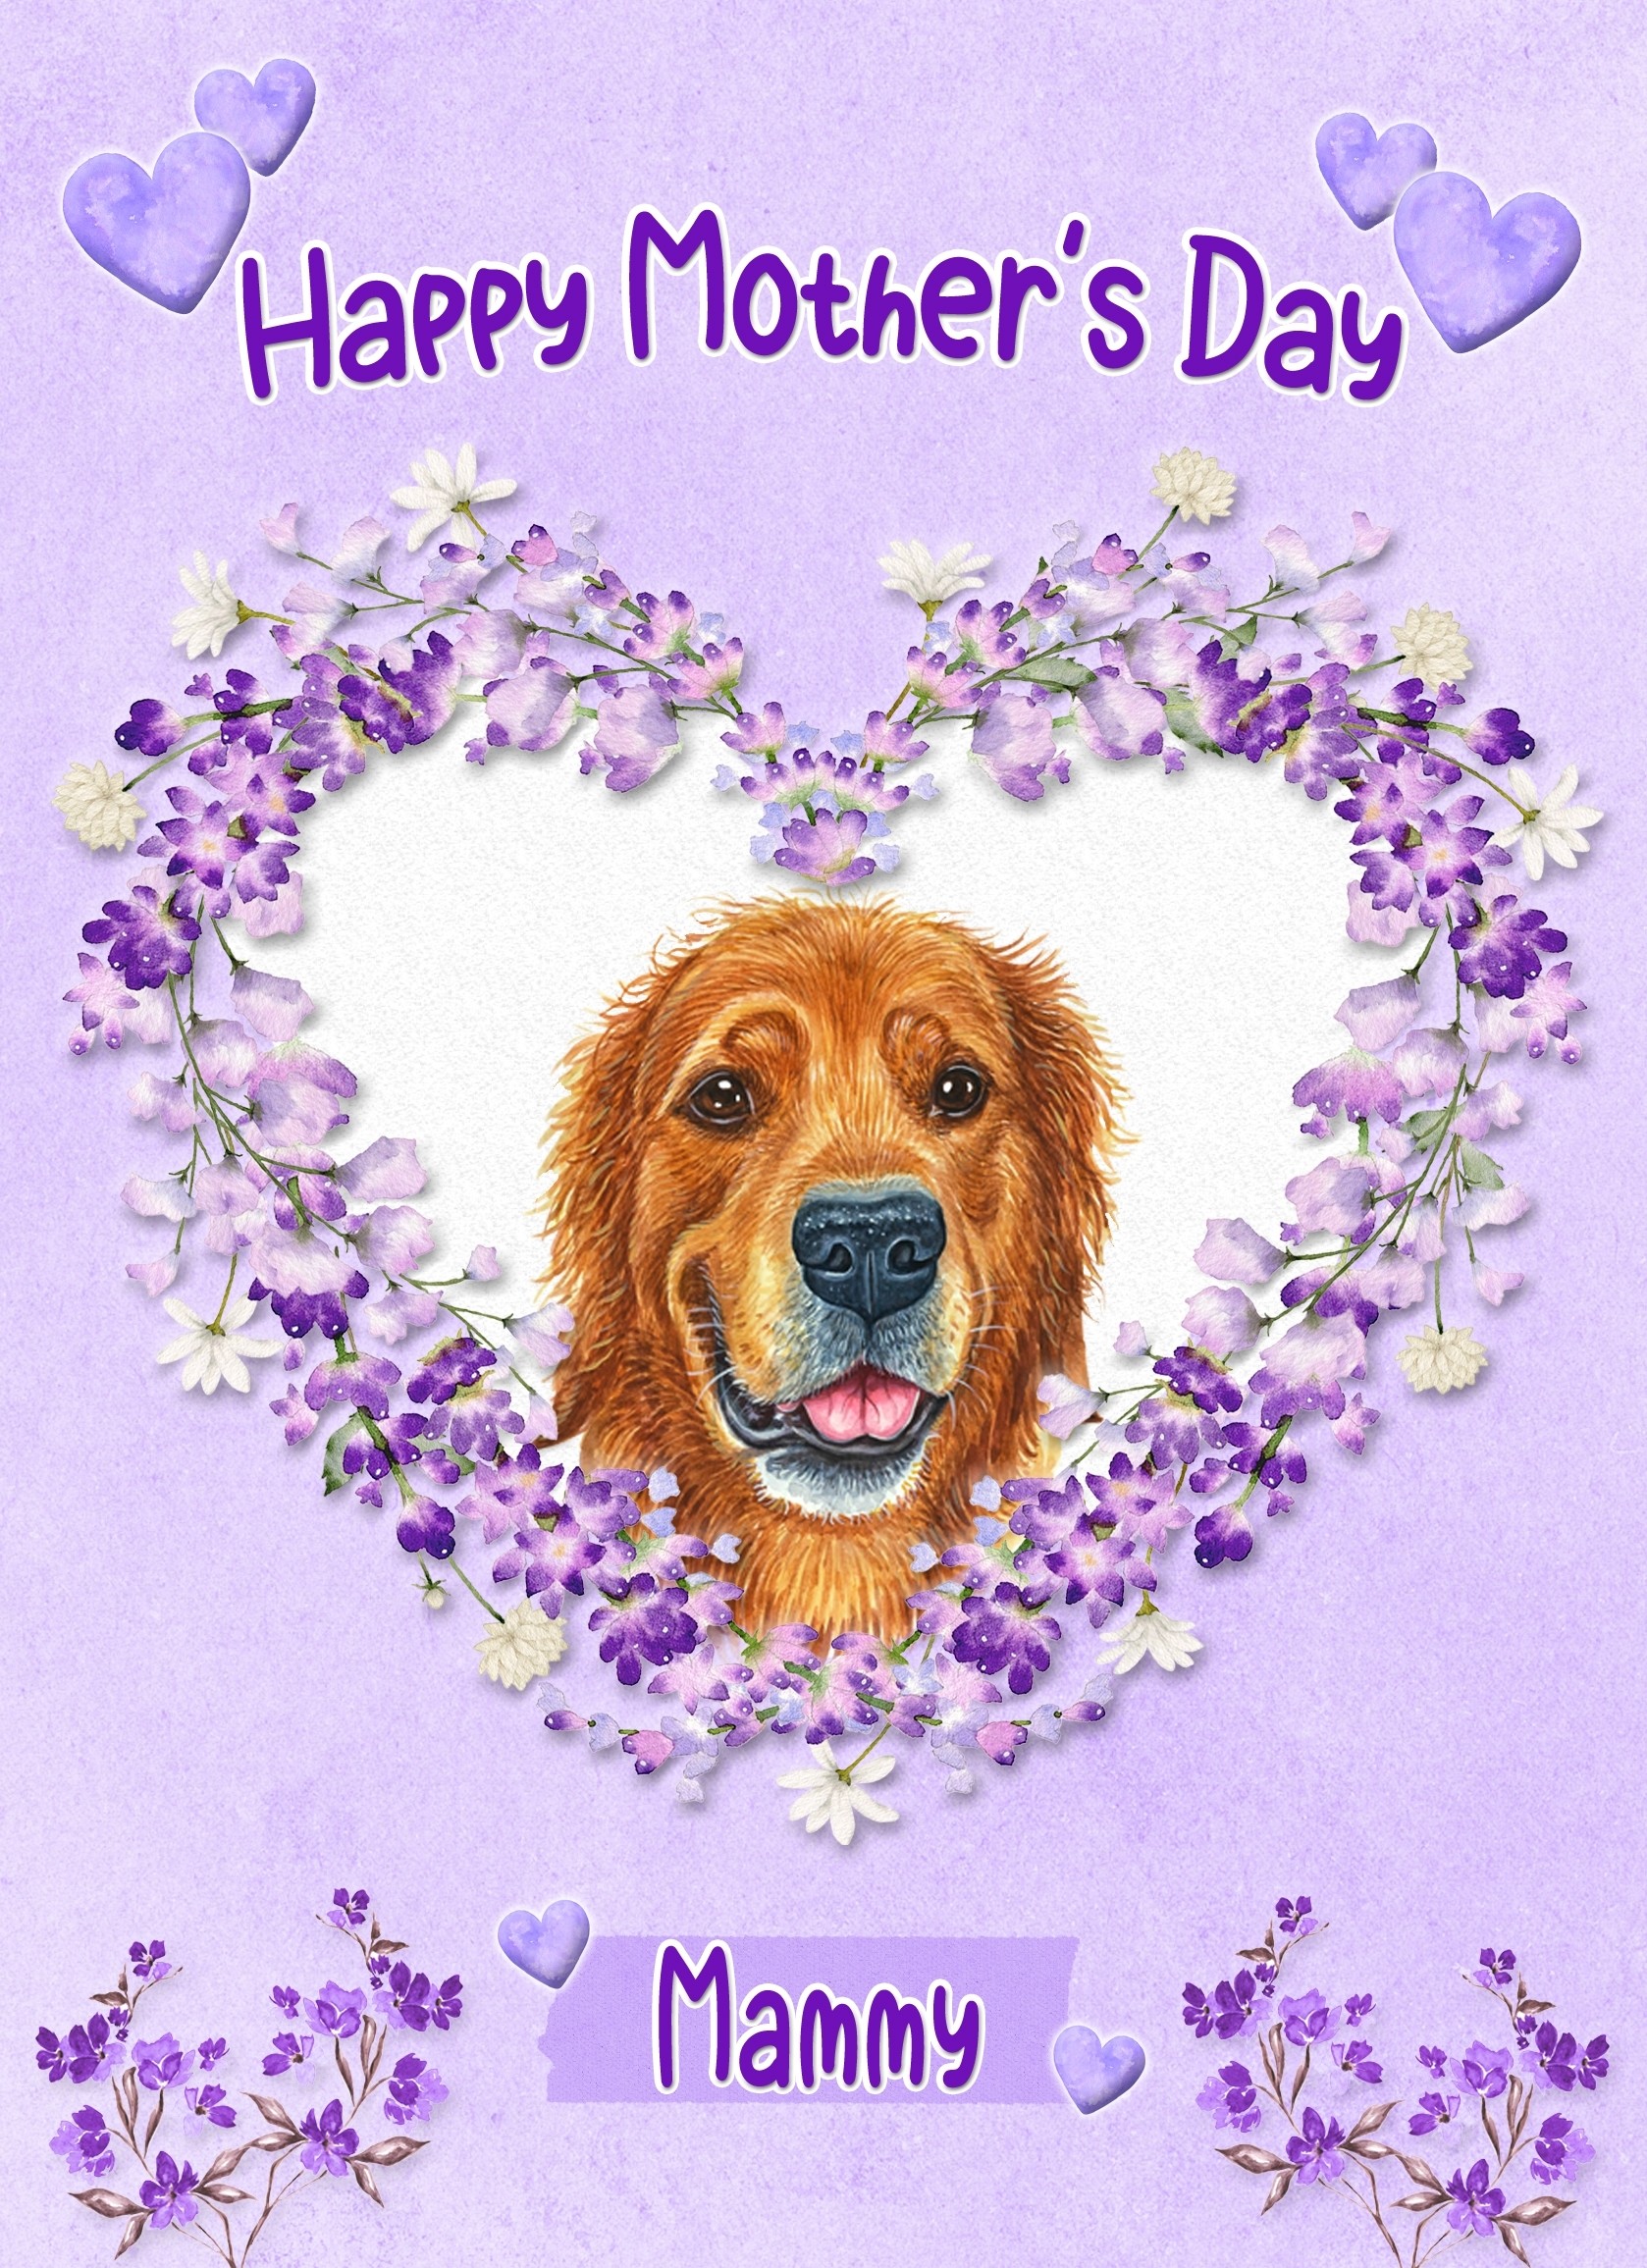 Golden Retriever Dog Mothers Day Card (Happy Mothers, Mammy)